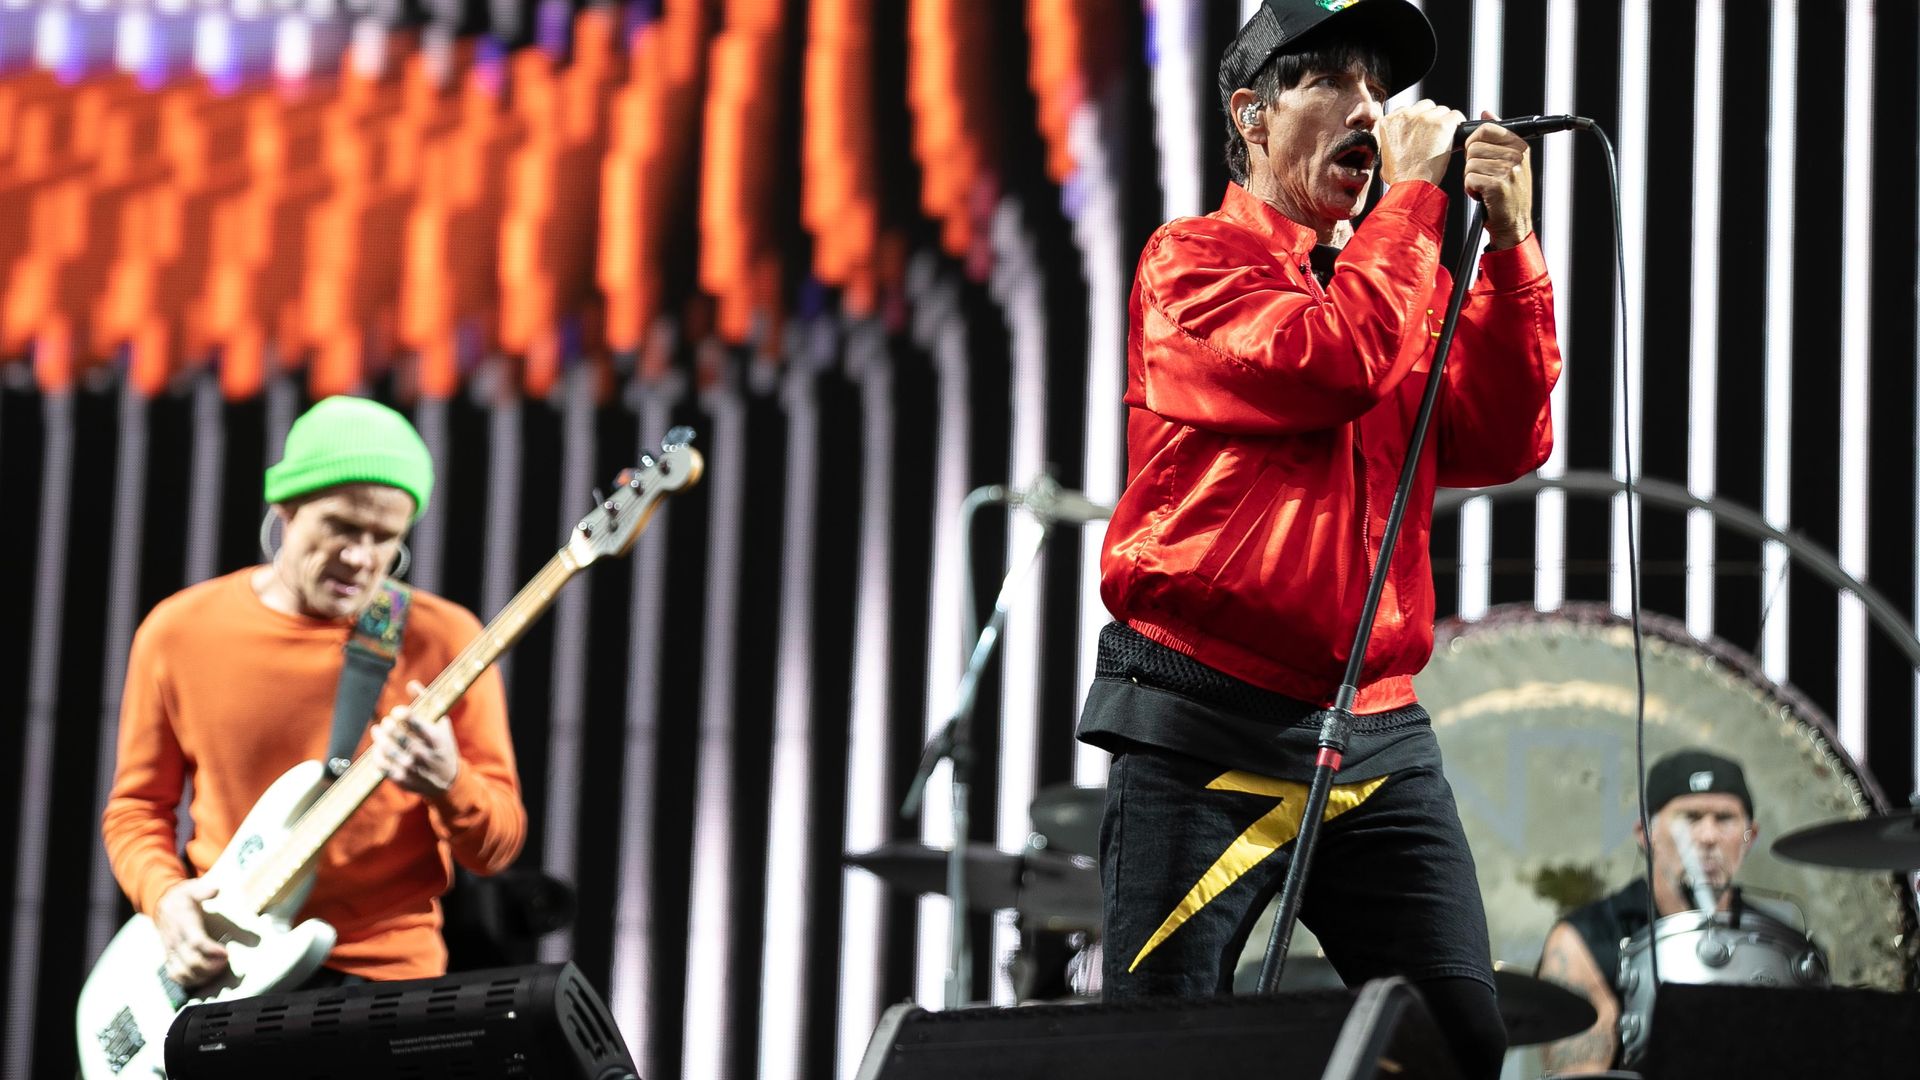 The Red Hot Chili Peppers performing earlier this year.